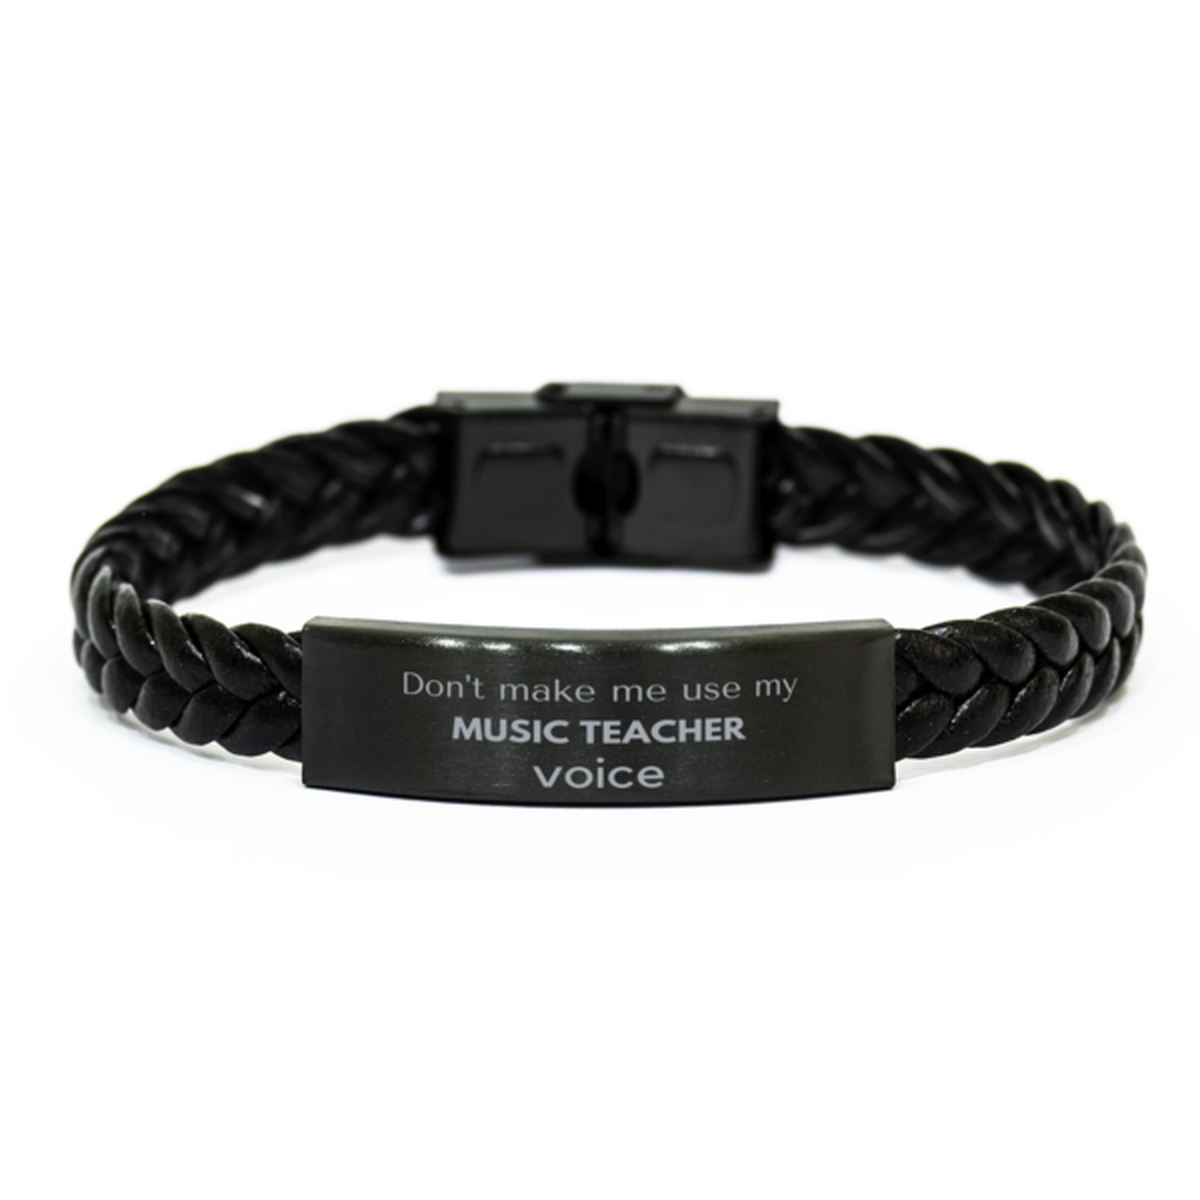 Don't make me use my Music Teacher voice, Sarcasm Music Teacher Gifts, Christmas Music Teacher Braided Leather Bracelet Birthday Unique Gifts For Music Teacher Coworkers, Men, Women, Colleague, Friends